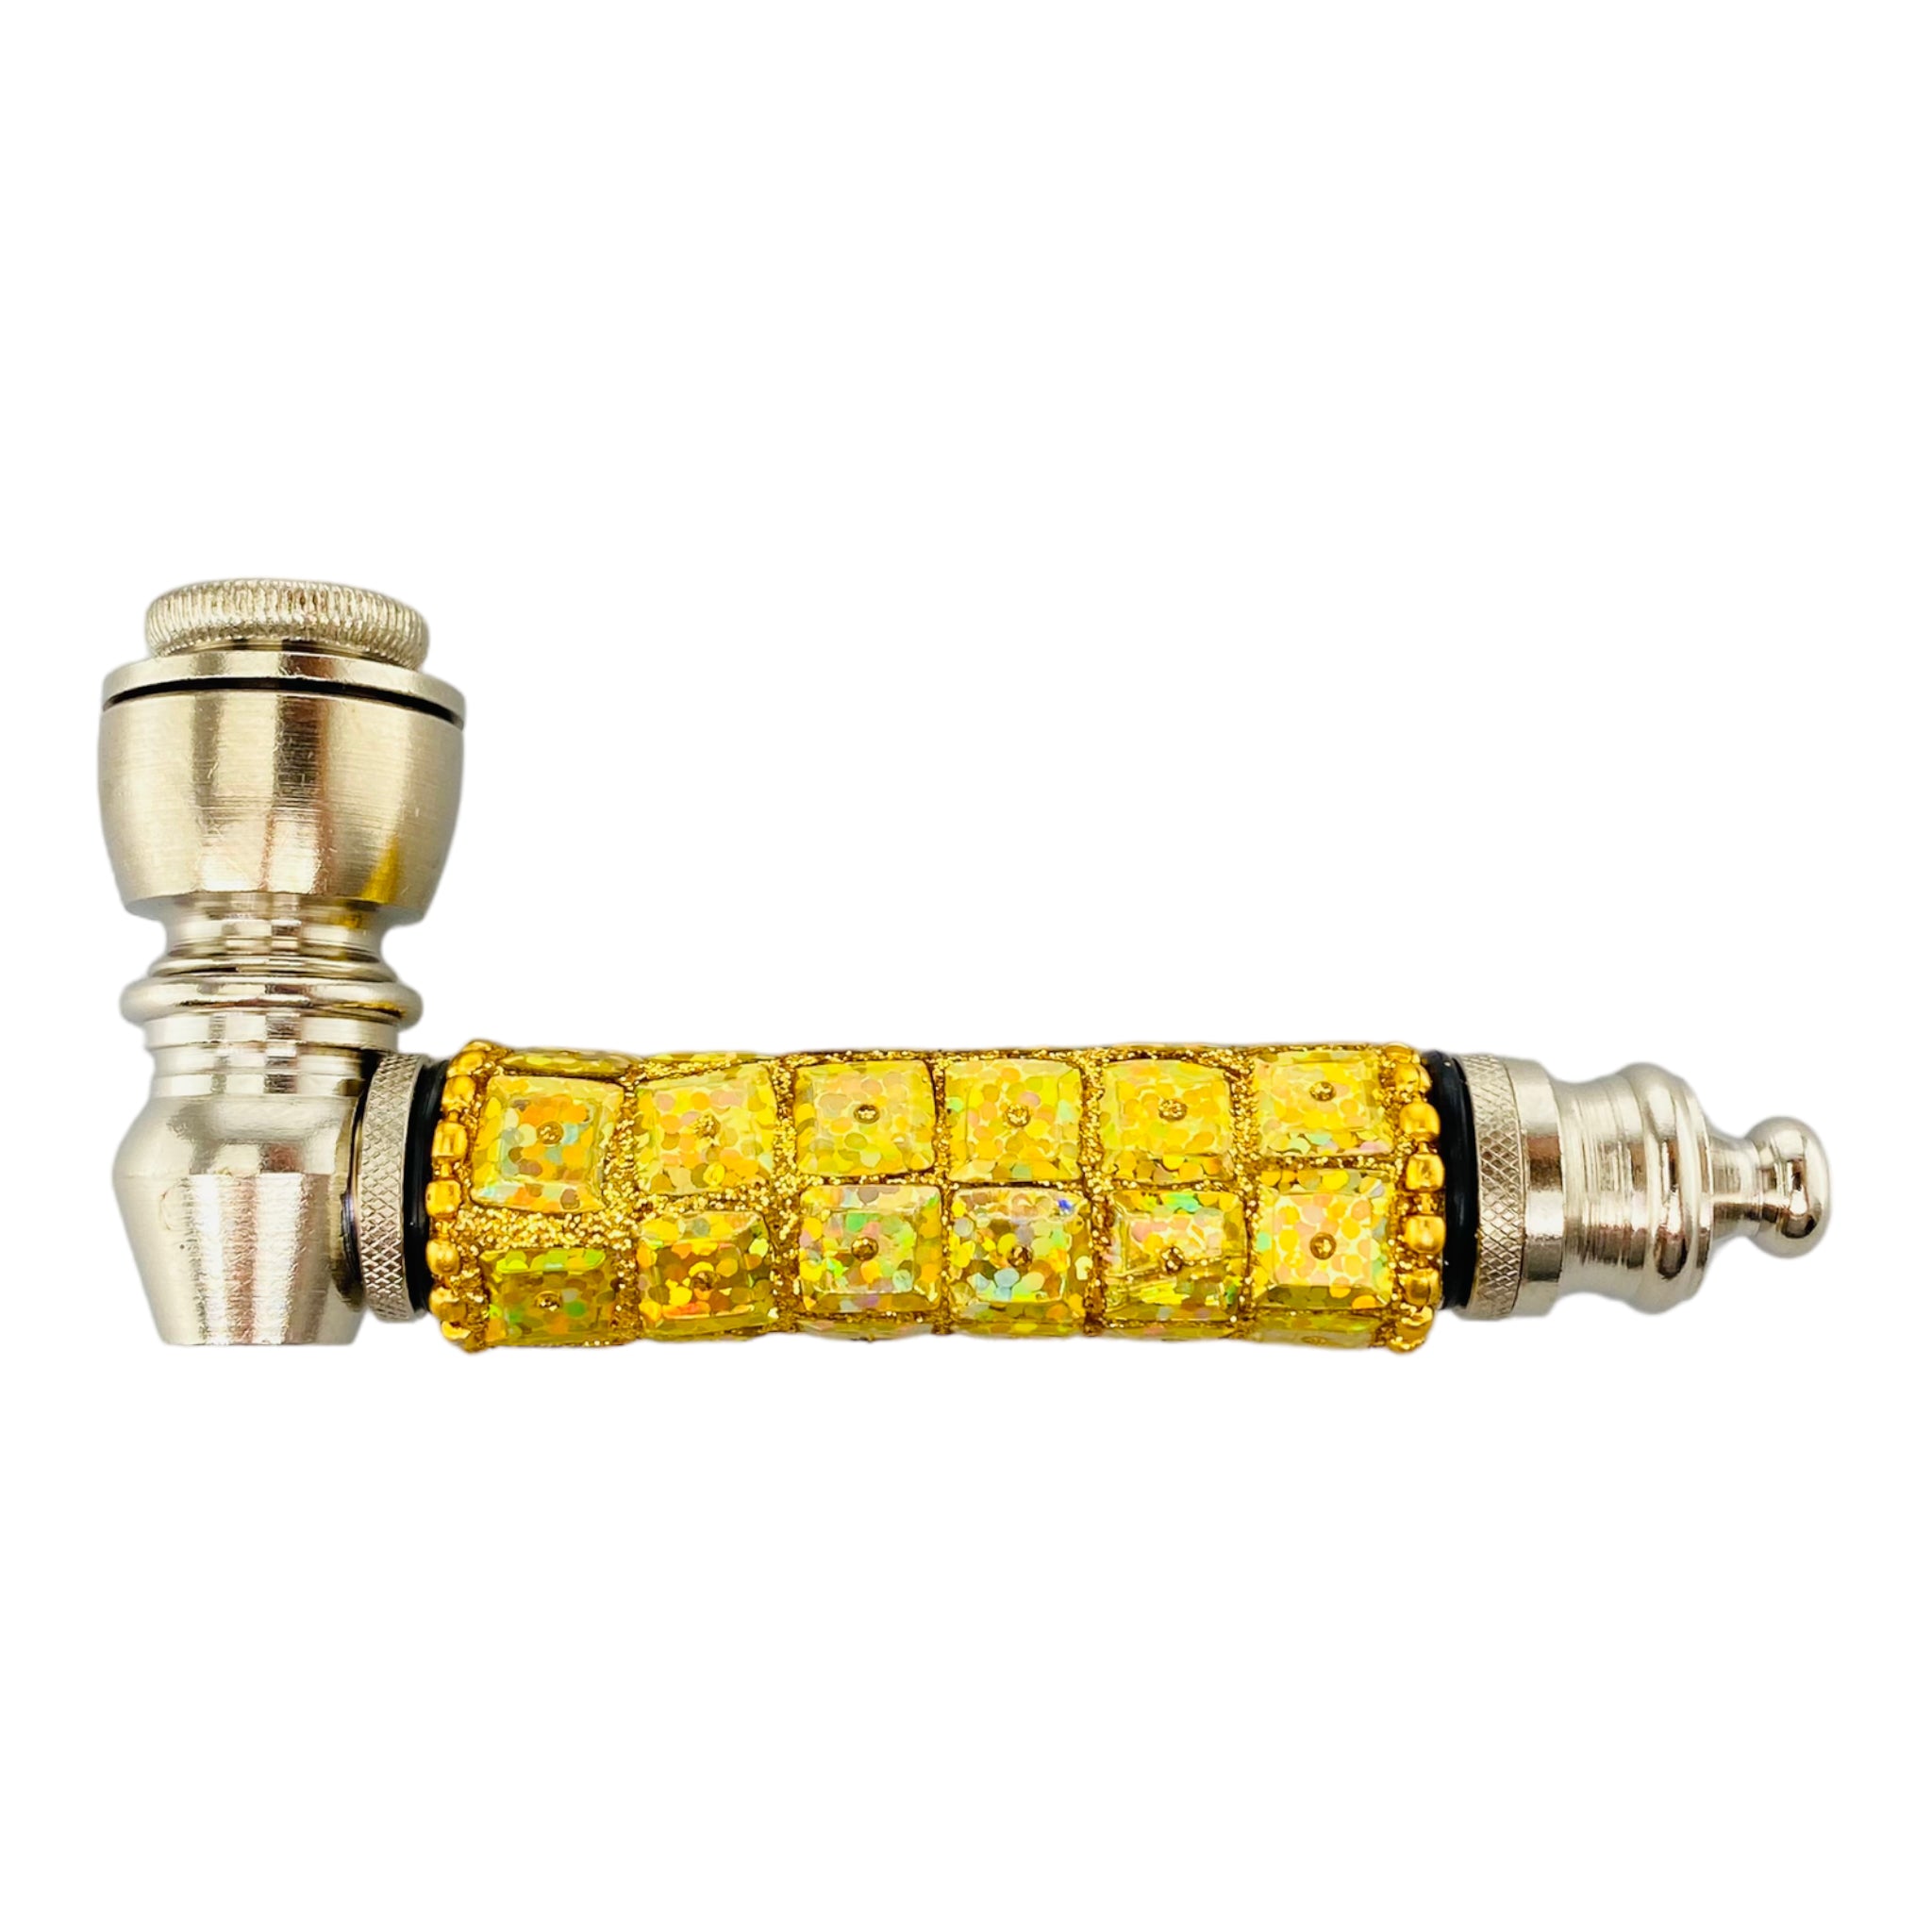 gold Silver smoking Hand Pipe With Bedazzled Stem